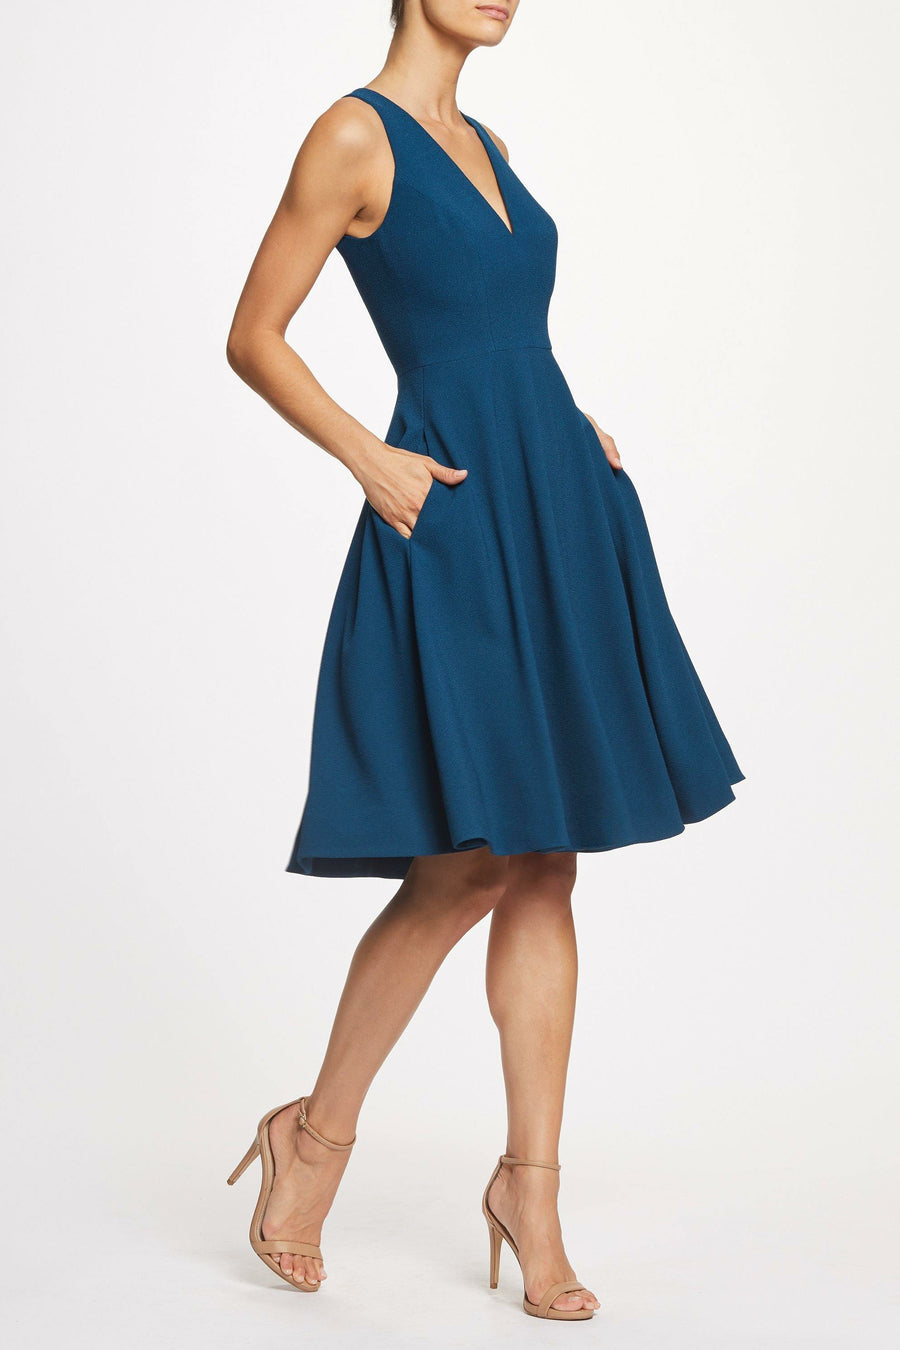 Catalina Chic Fit And Flare Cocktail Dress - Dress the Population